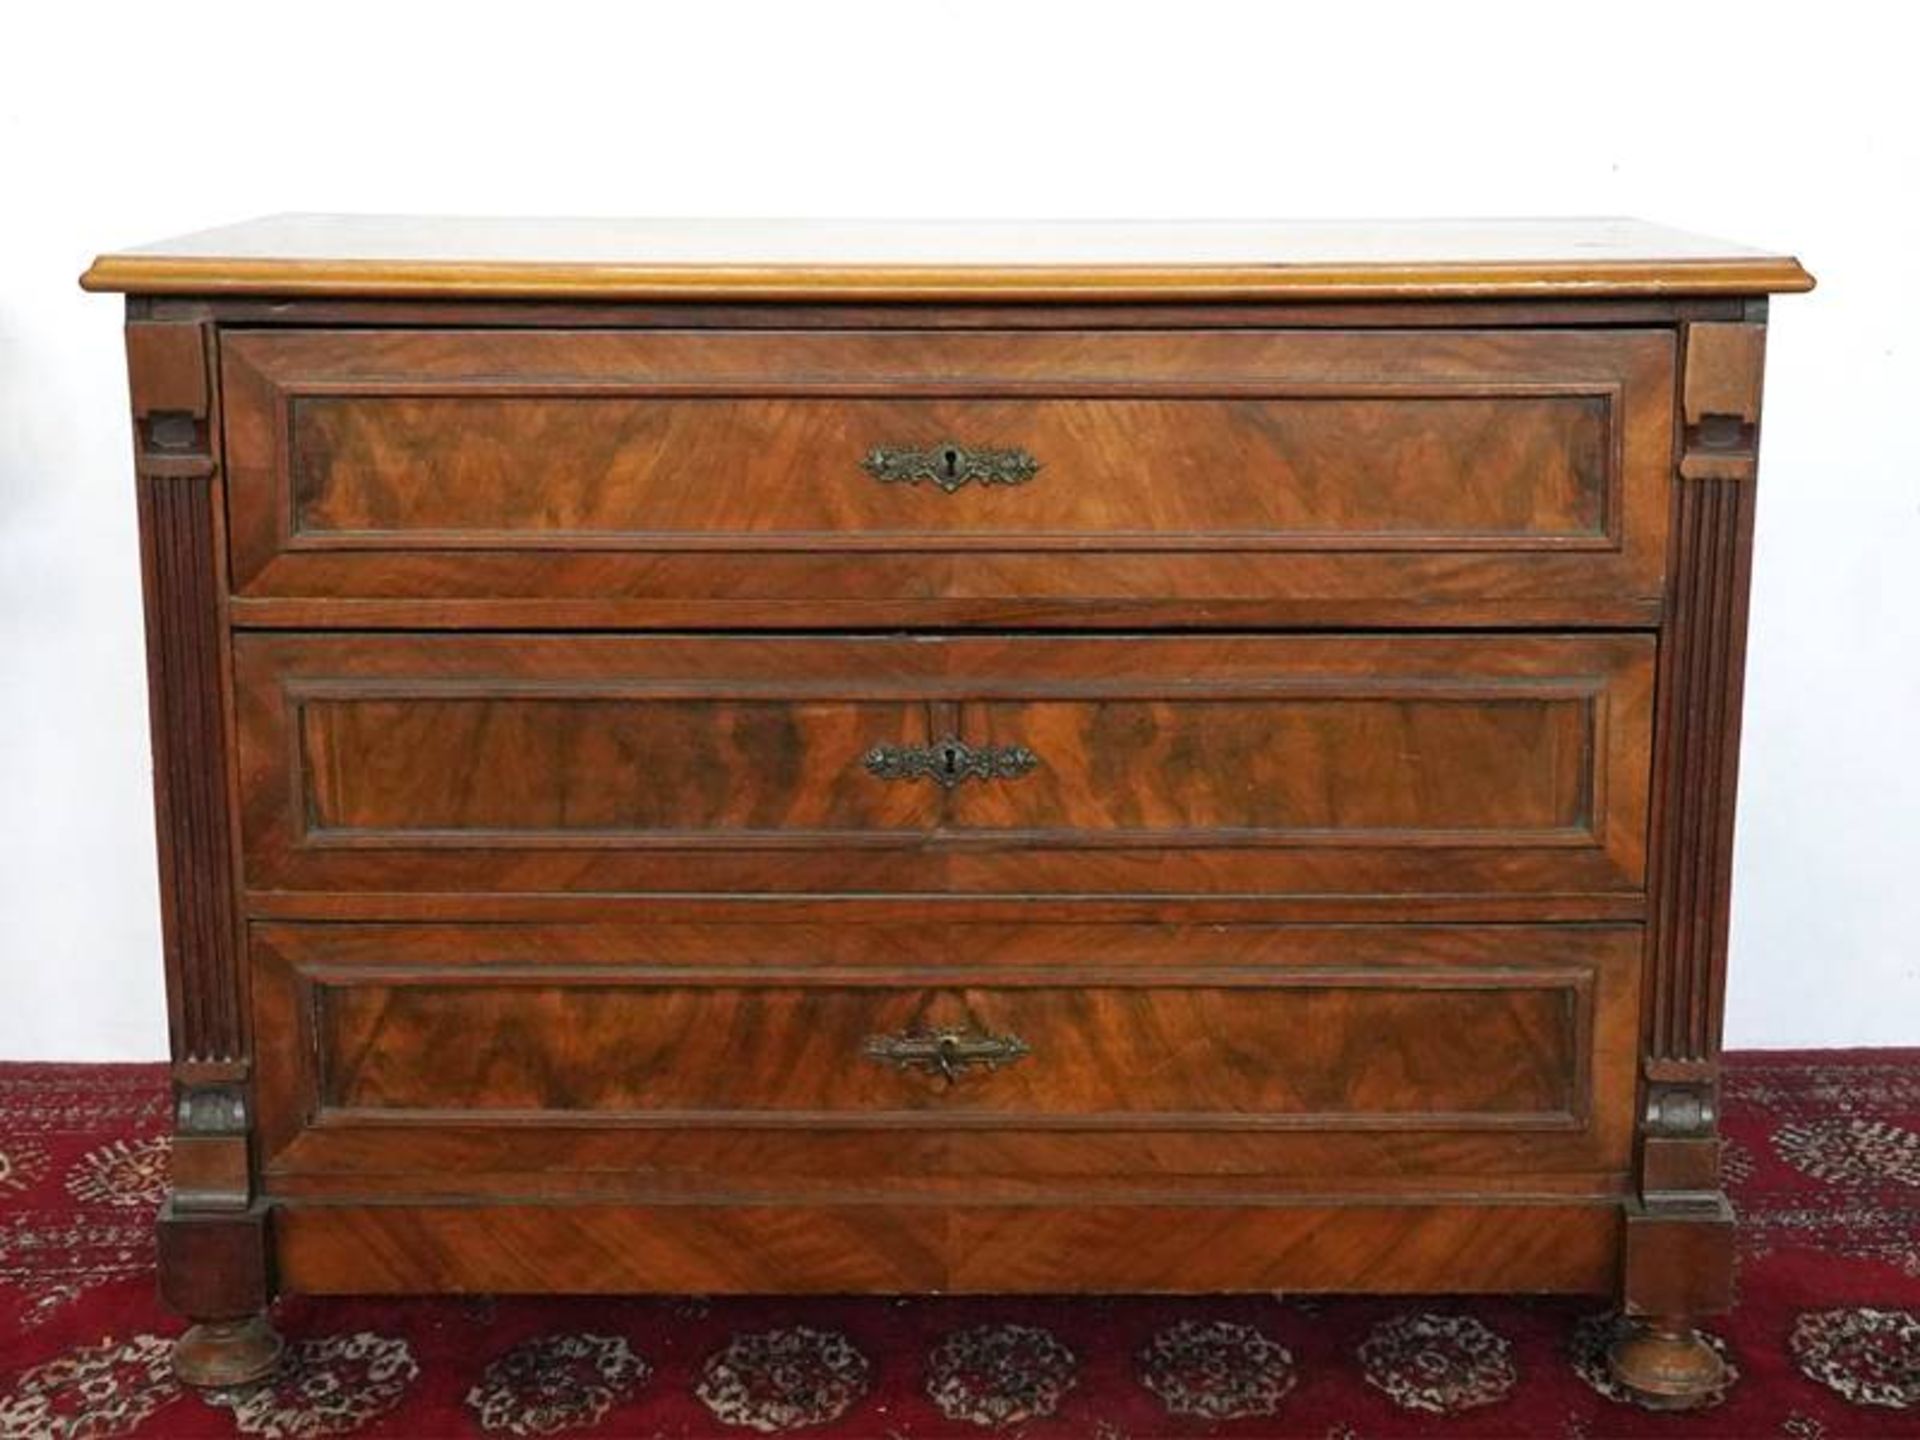 Wilhelminian period chest of drawers